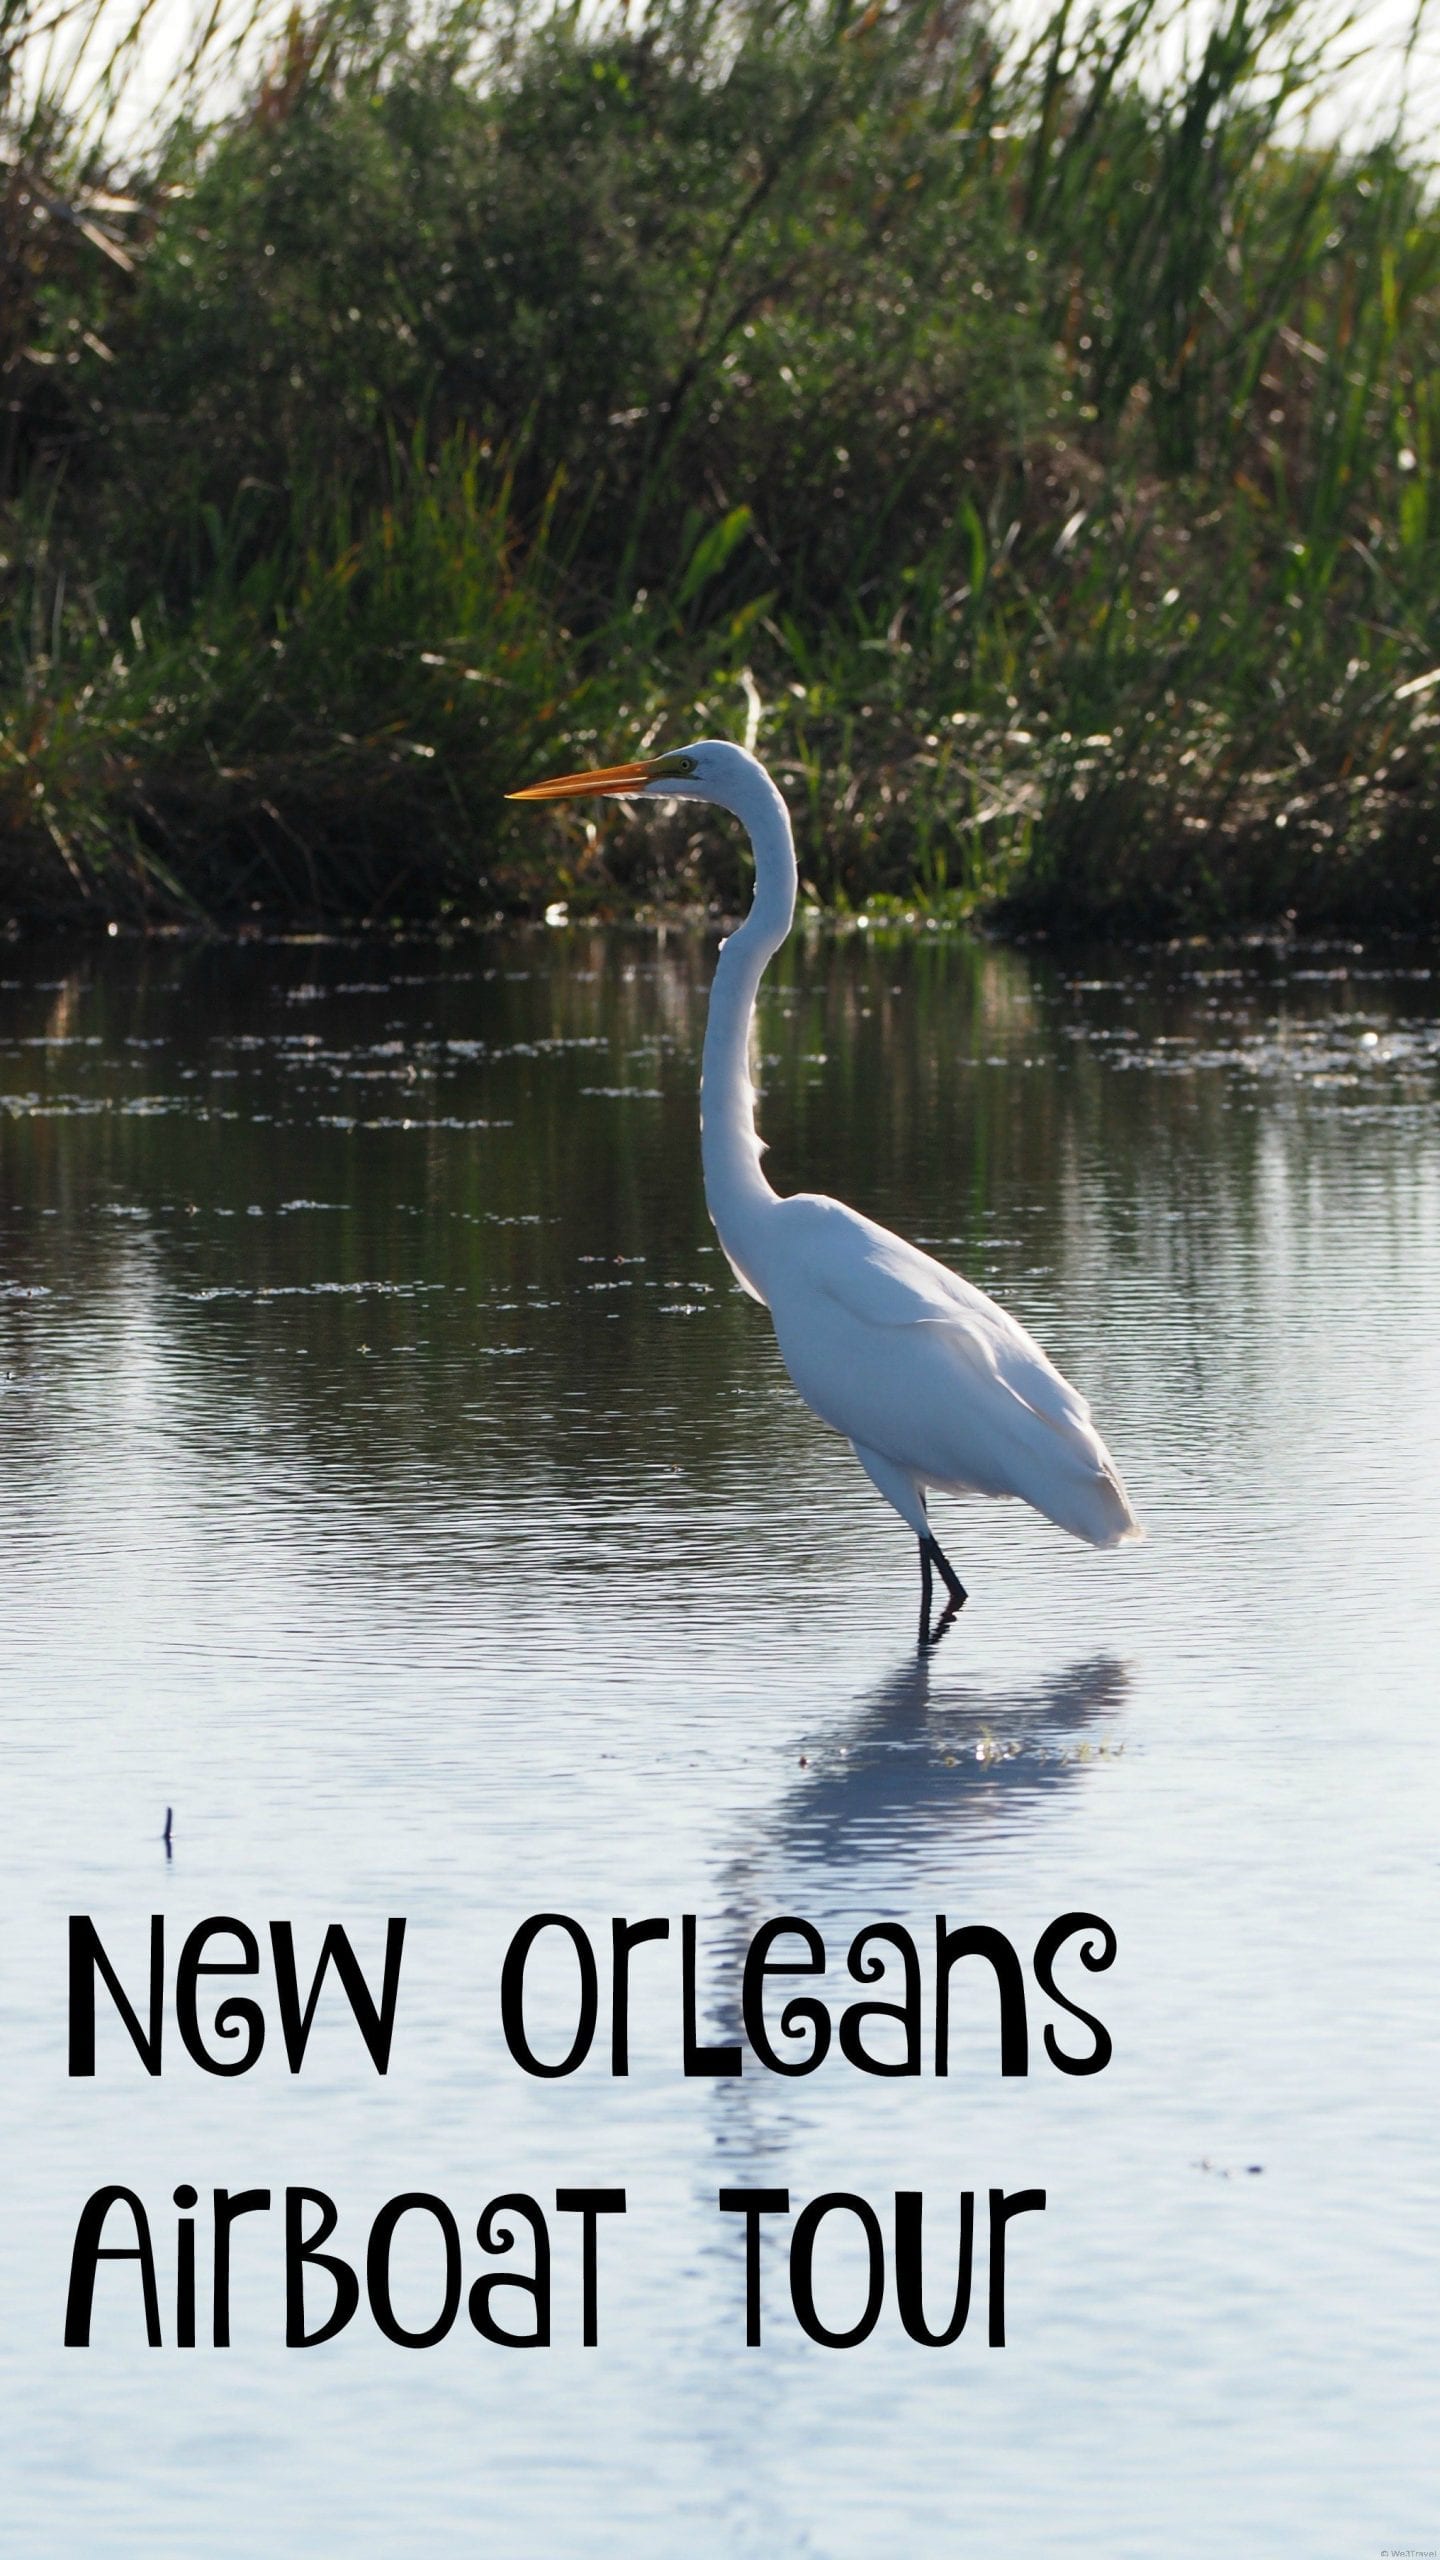 Airboat tours New Orleans style through the Louisiana swamp to see alligators, egrets, heron and more! 